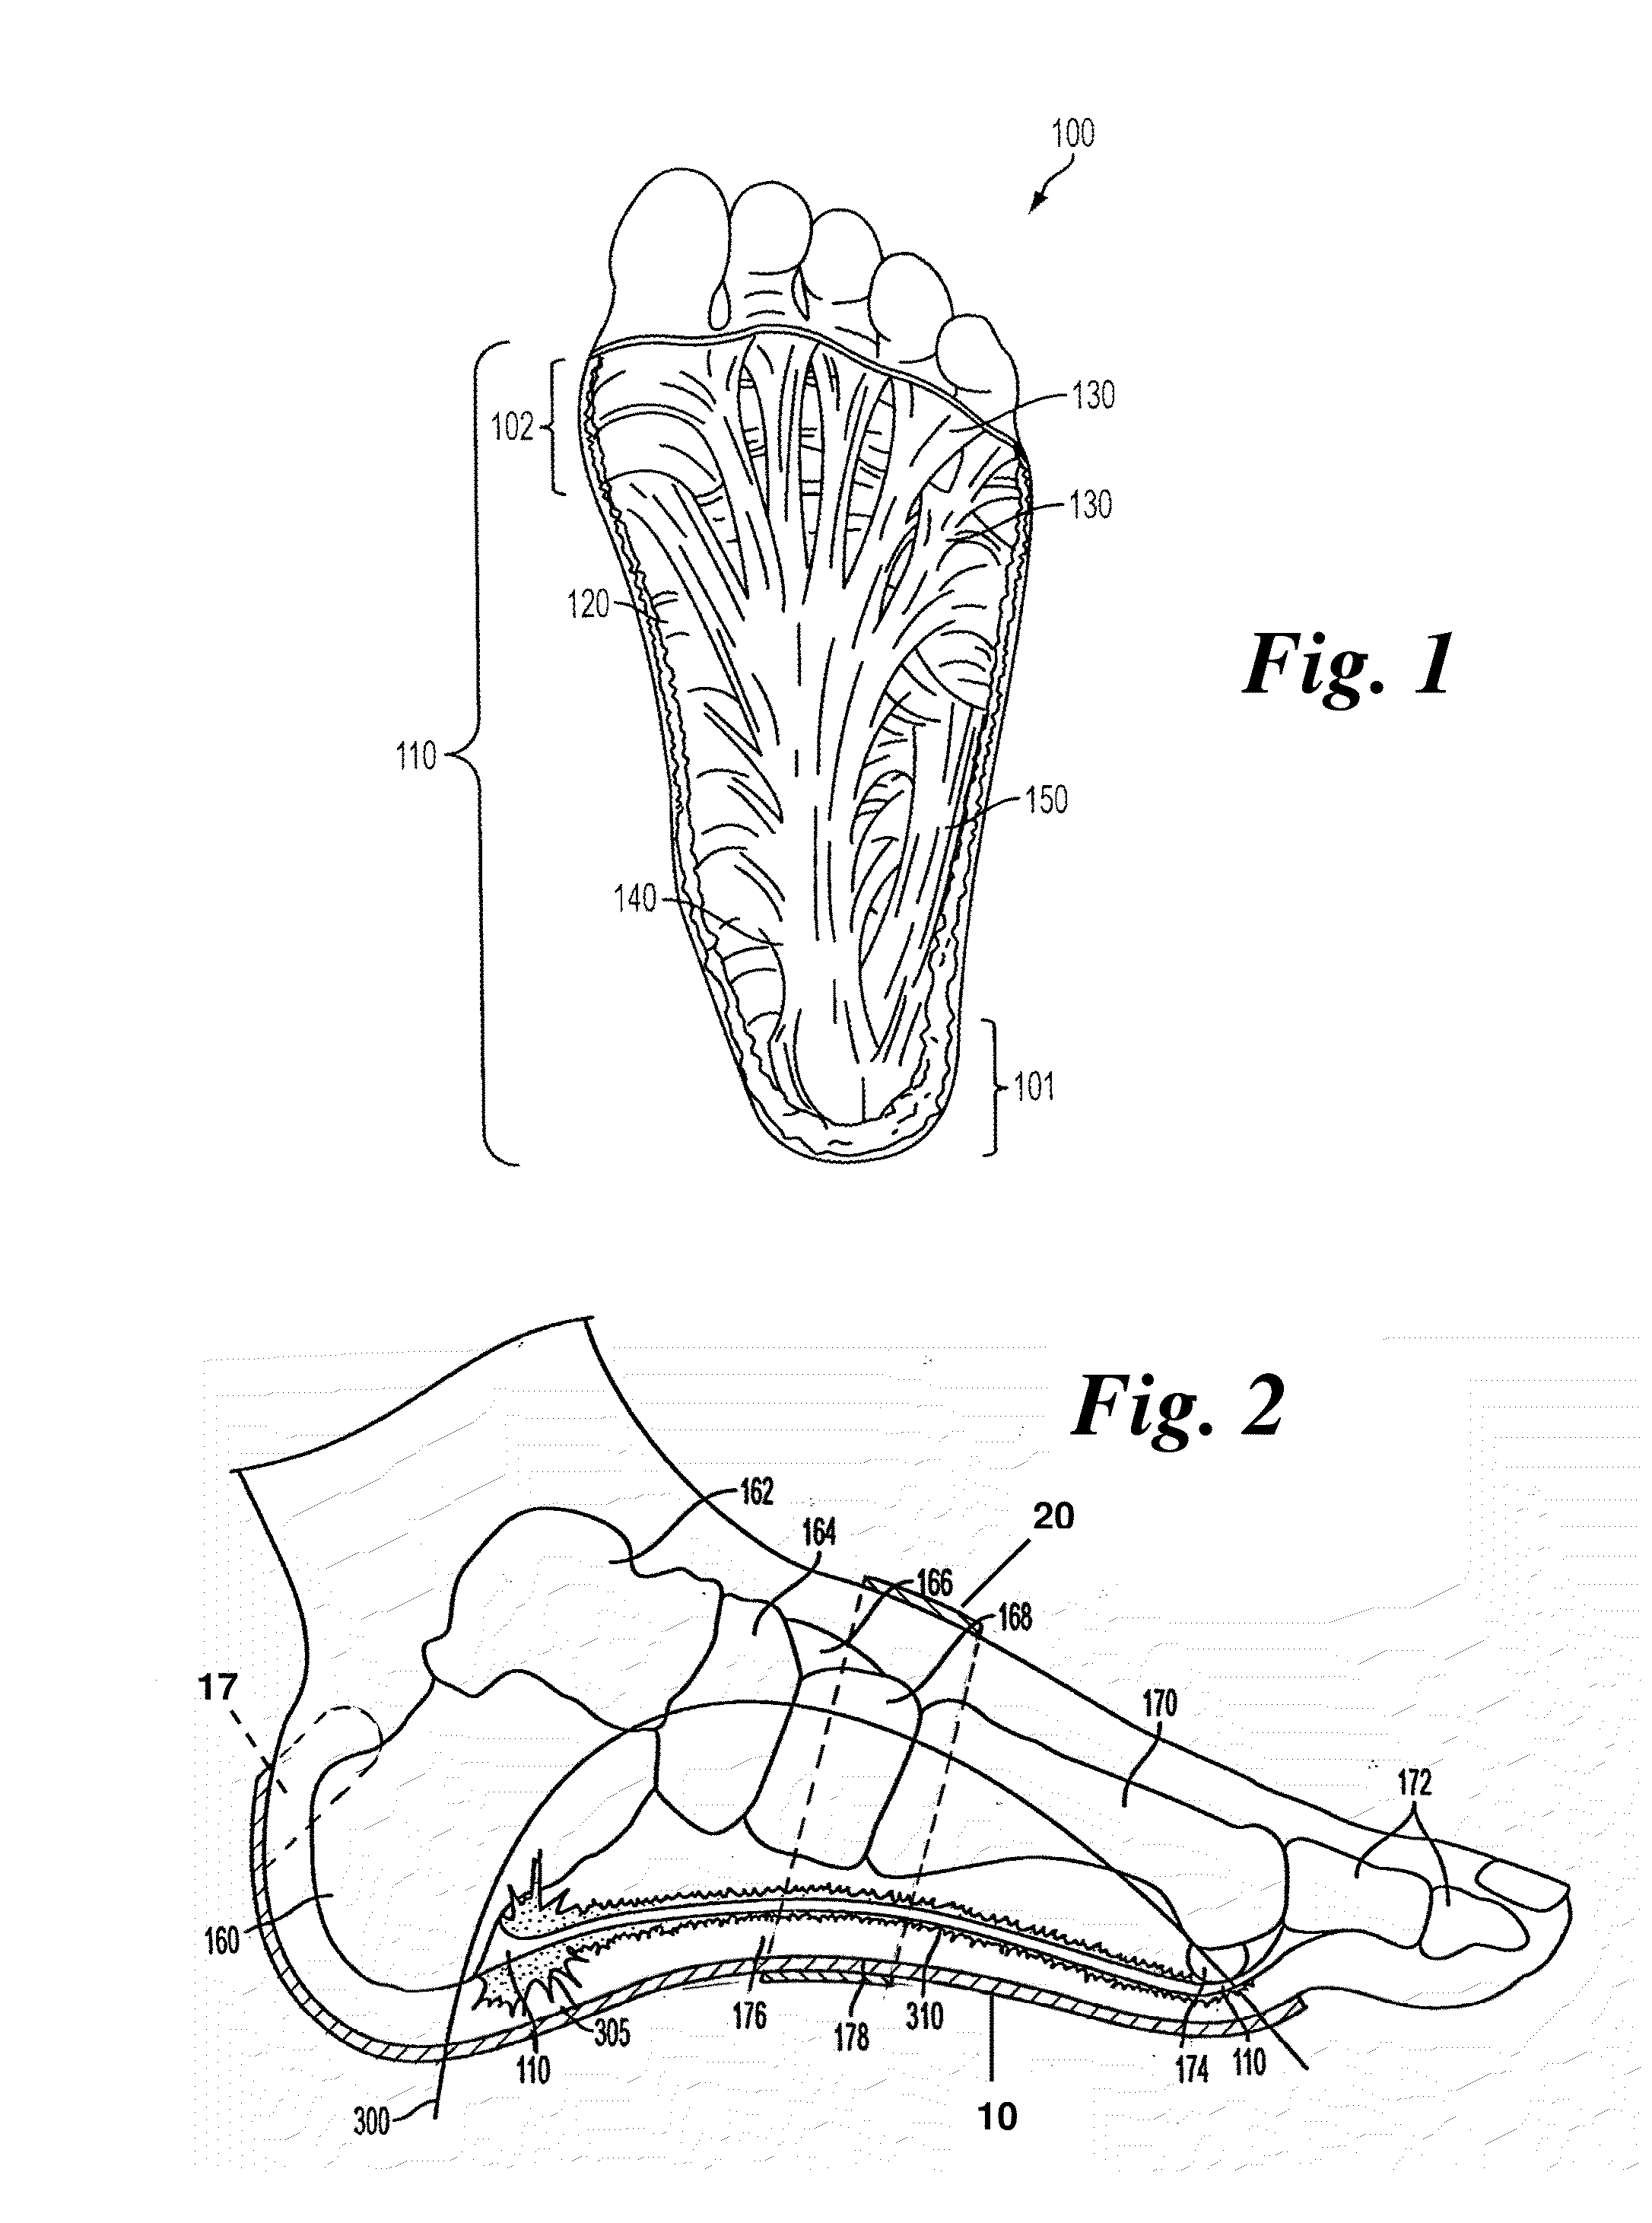 Disposable Two-Part Orthotic Foot Support Strap System And Method